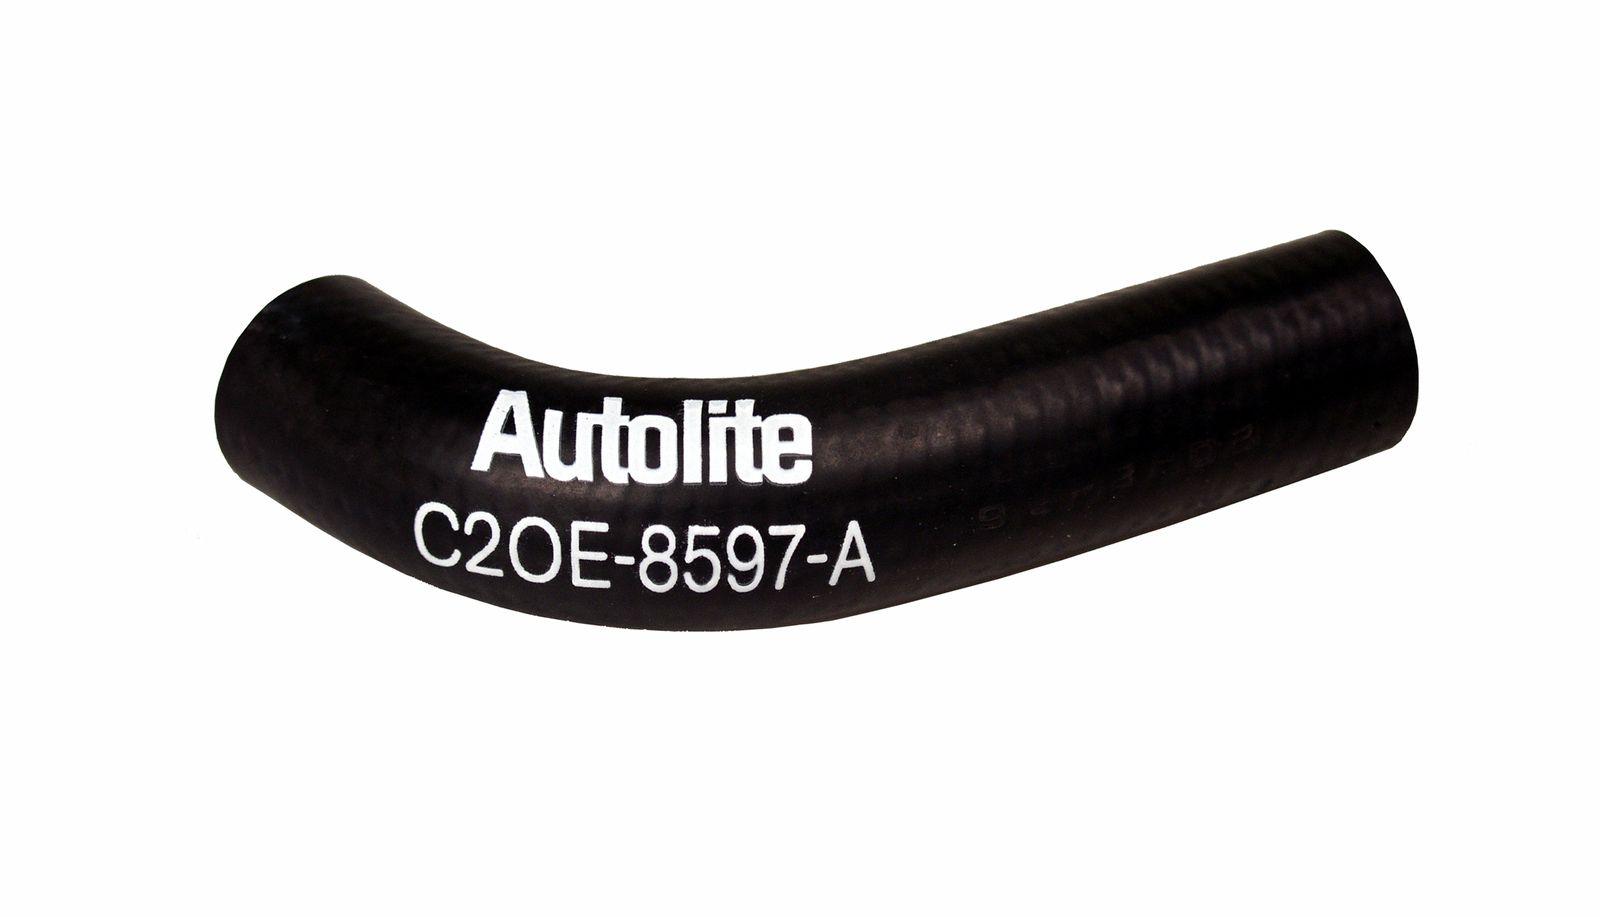 Autolite Logo - 1971 Mustang By Pass Hose With Autolite Logo